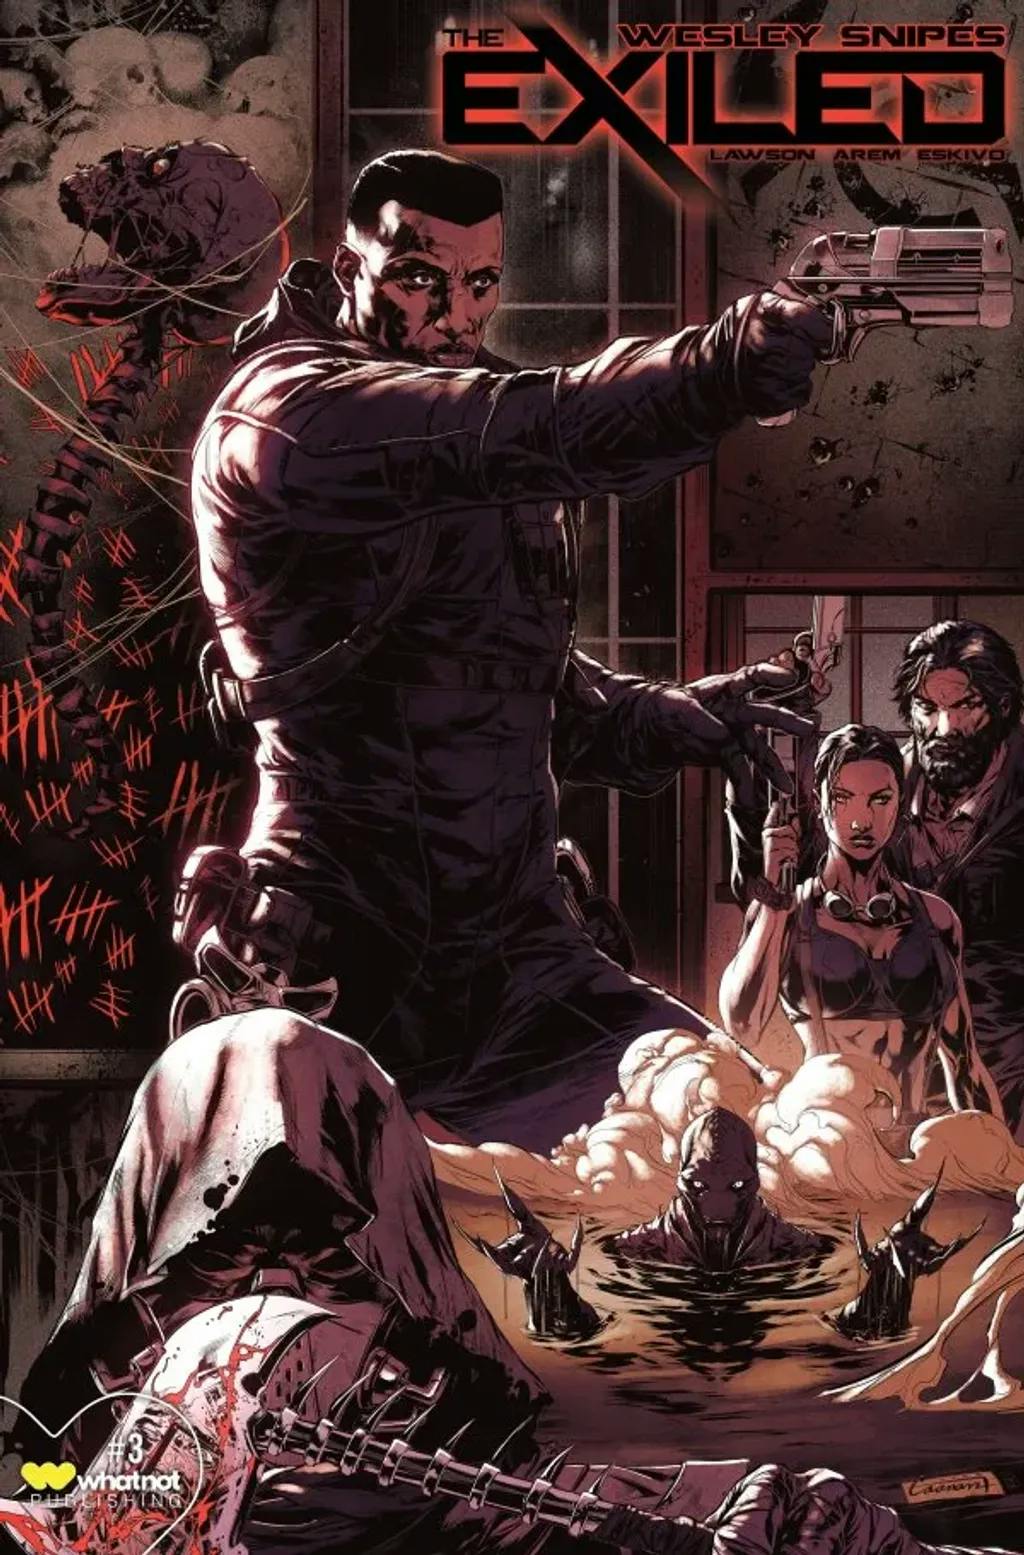 The Exiled #3 By Wesley Snipes, Adam Lawson, Keith Arem, and Eskivo